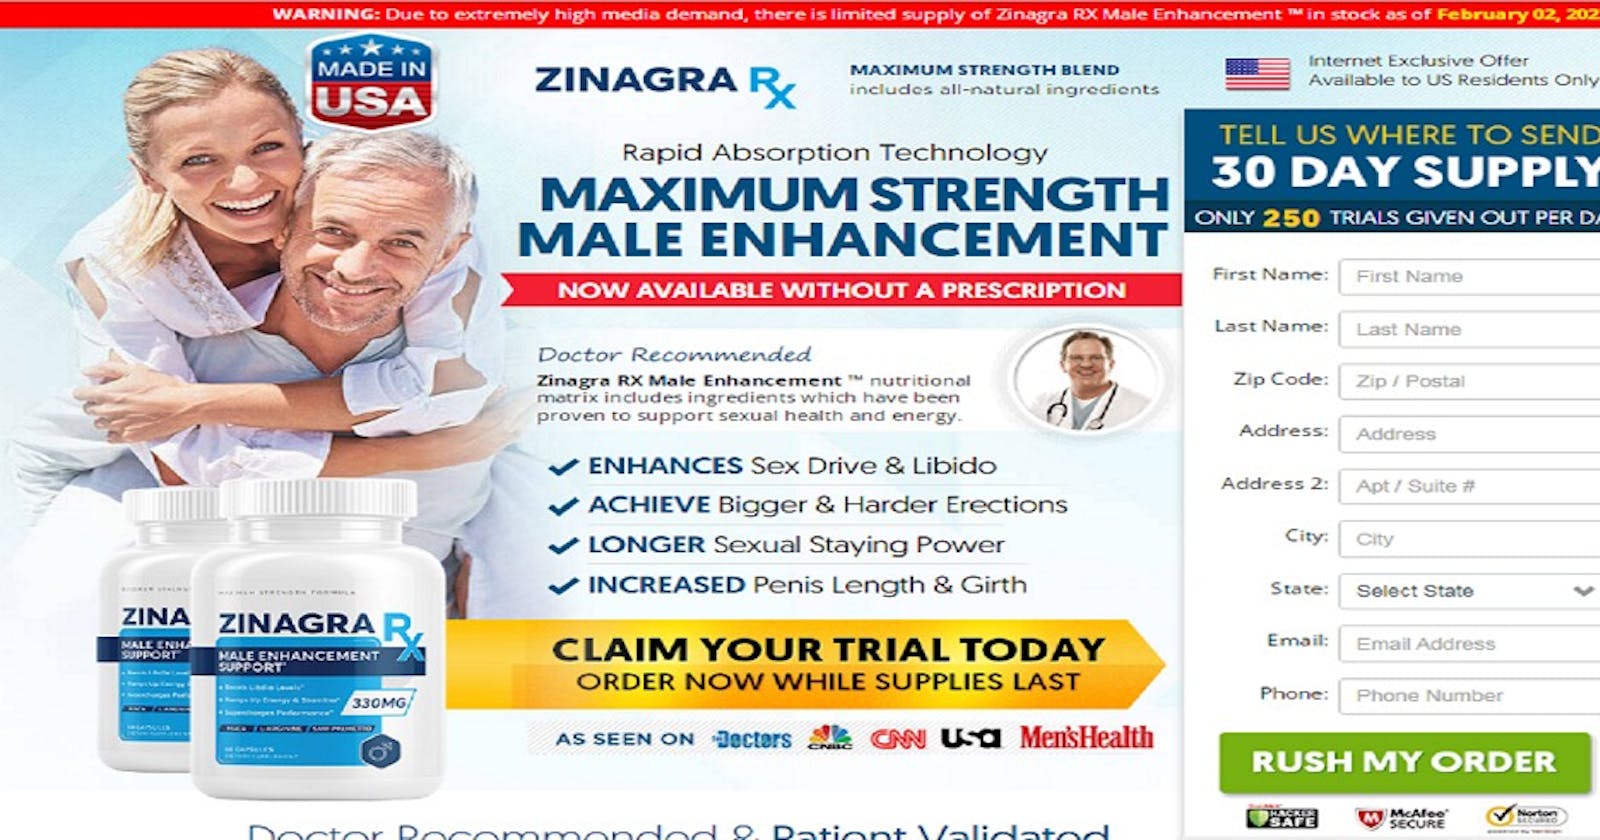 Zinagra RX Male Enhancement – Increase Sexual Power, Learn More!